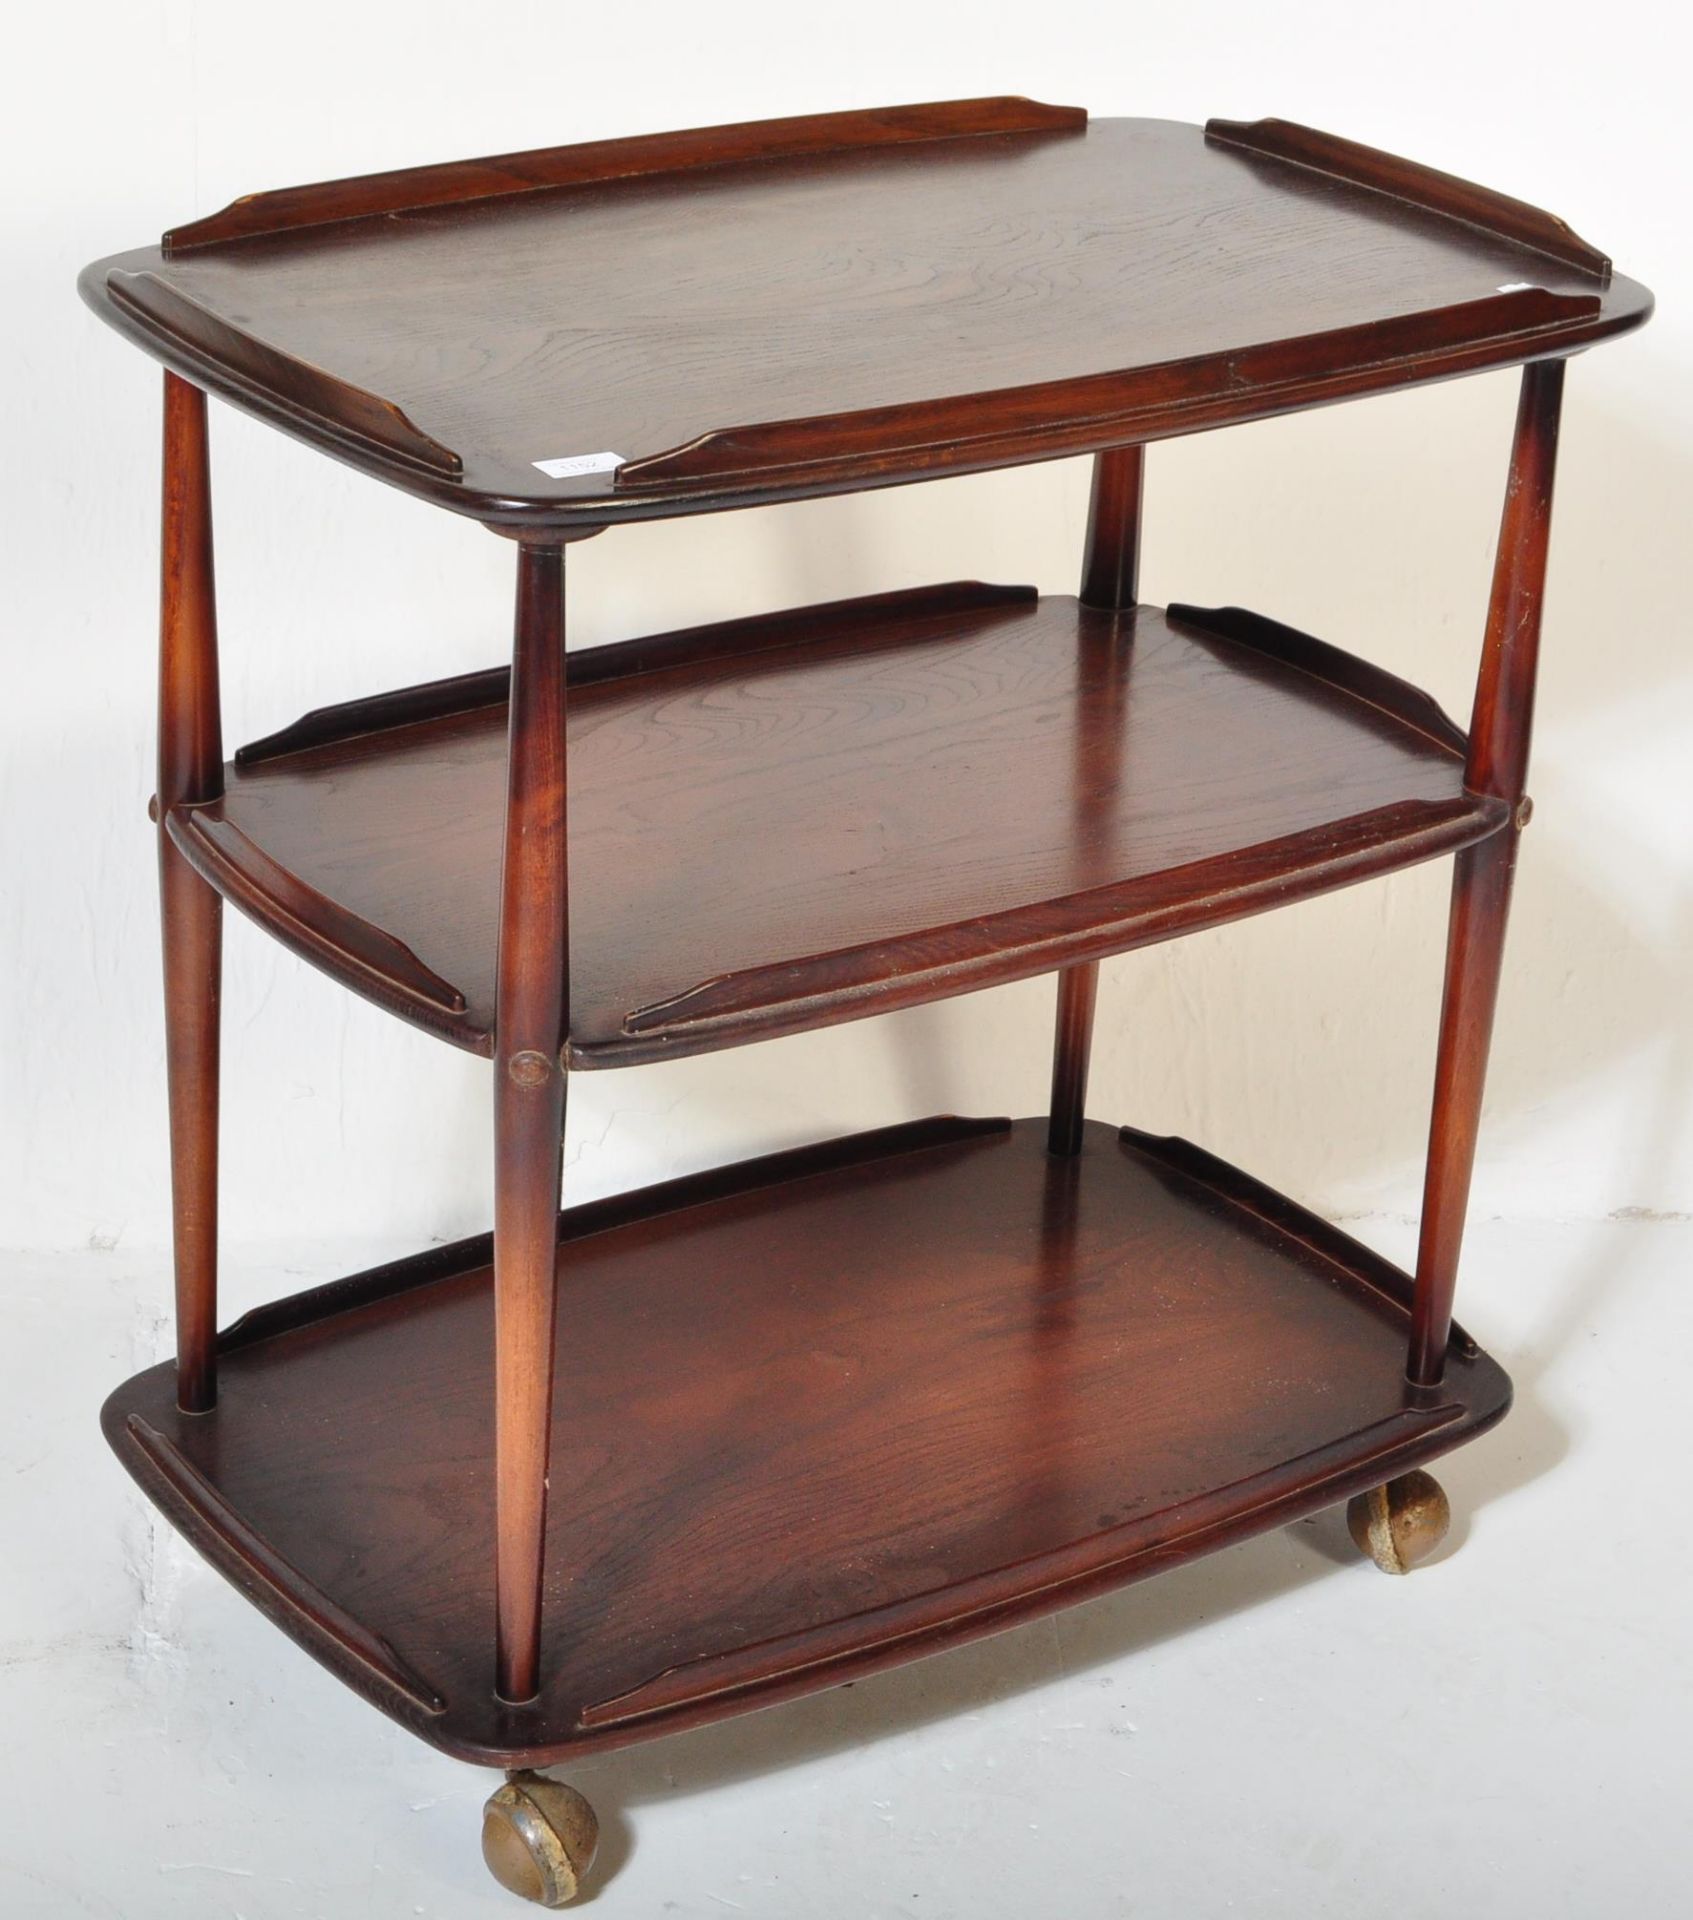 ERCOL MID 20TH CENTURY ELM SERVING TROLLEY - Image 2 of 5